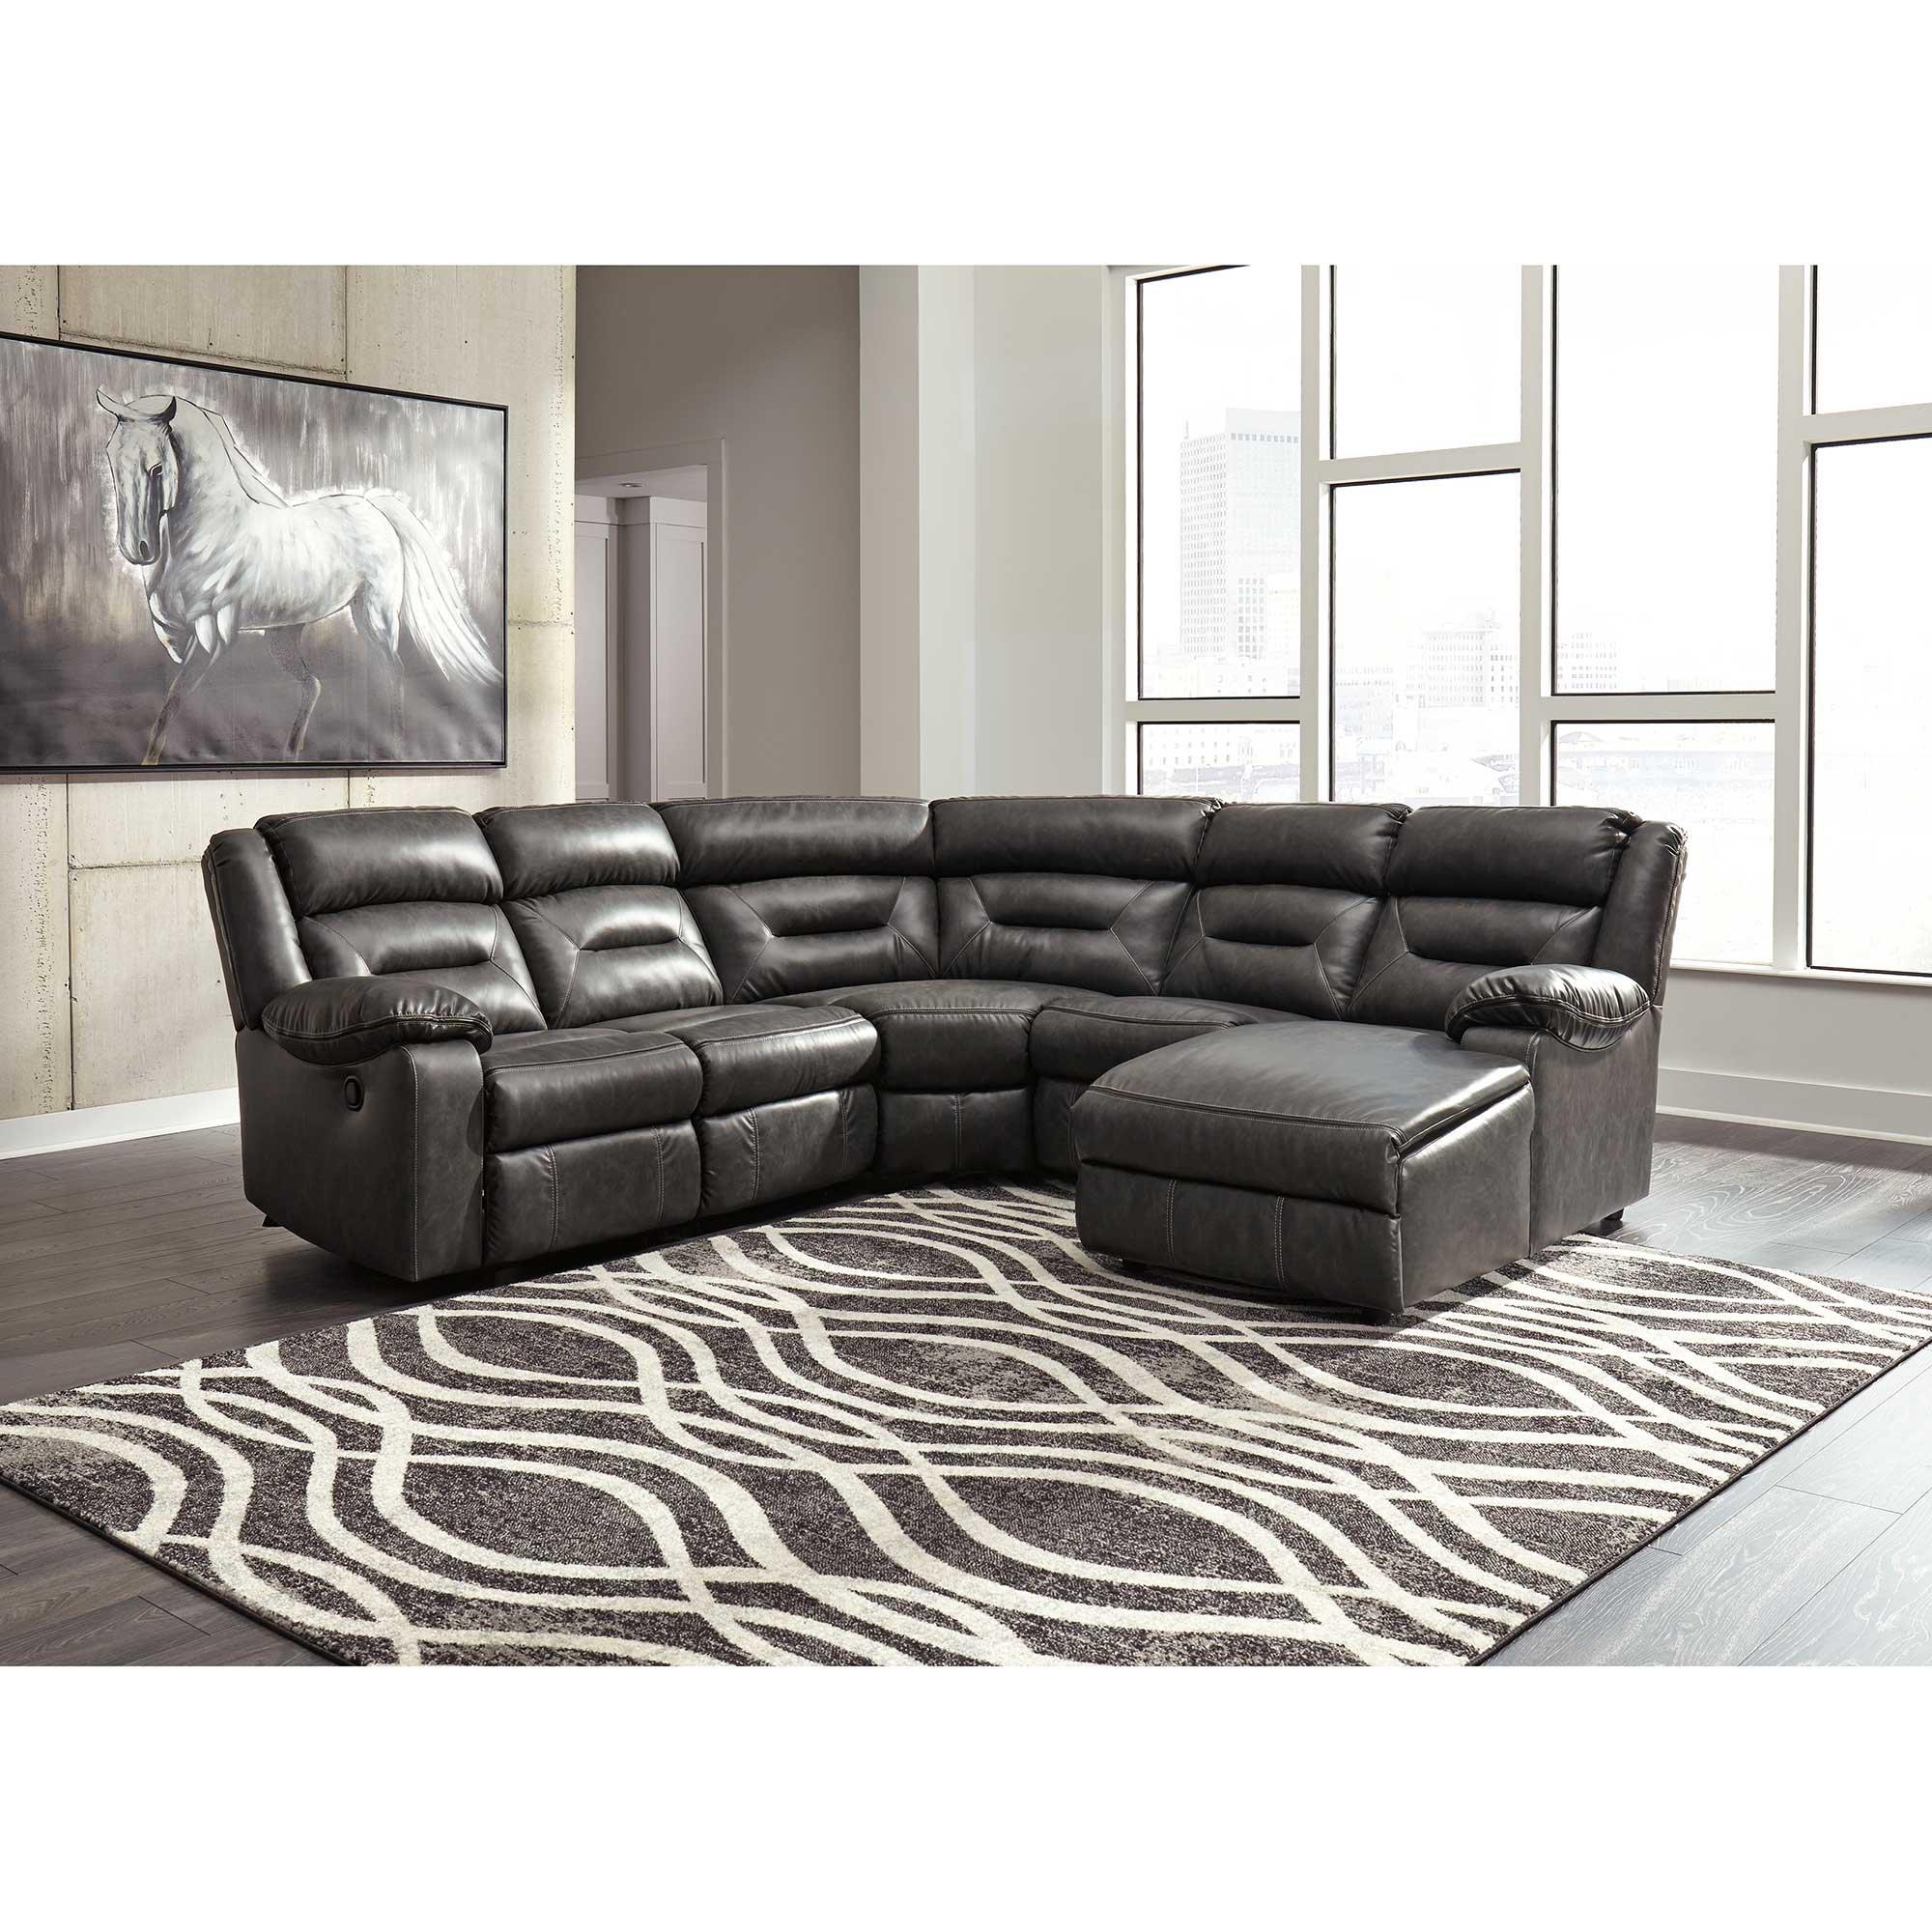 Rent To Own Ashley 5 Piece Coahoma Gray Reclining Sectional Living Room Collection At Aarons Today